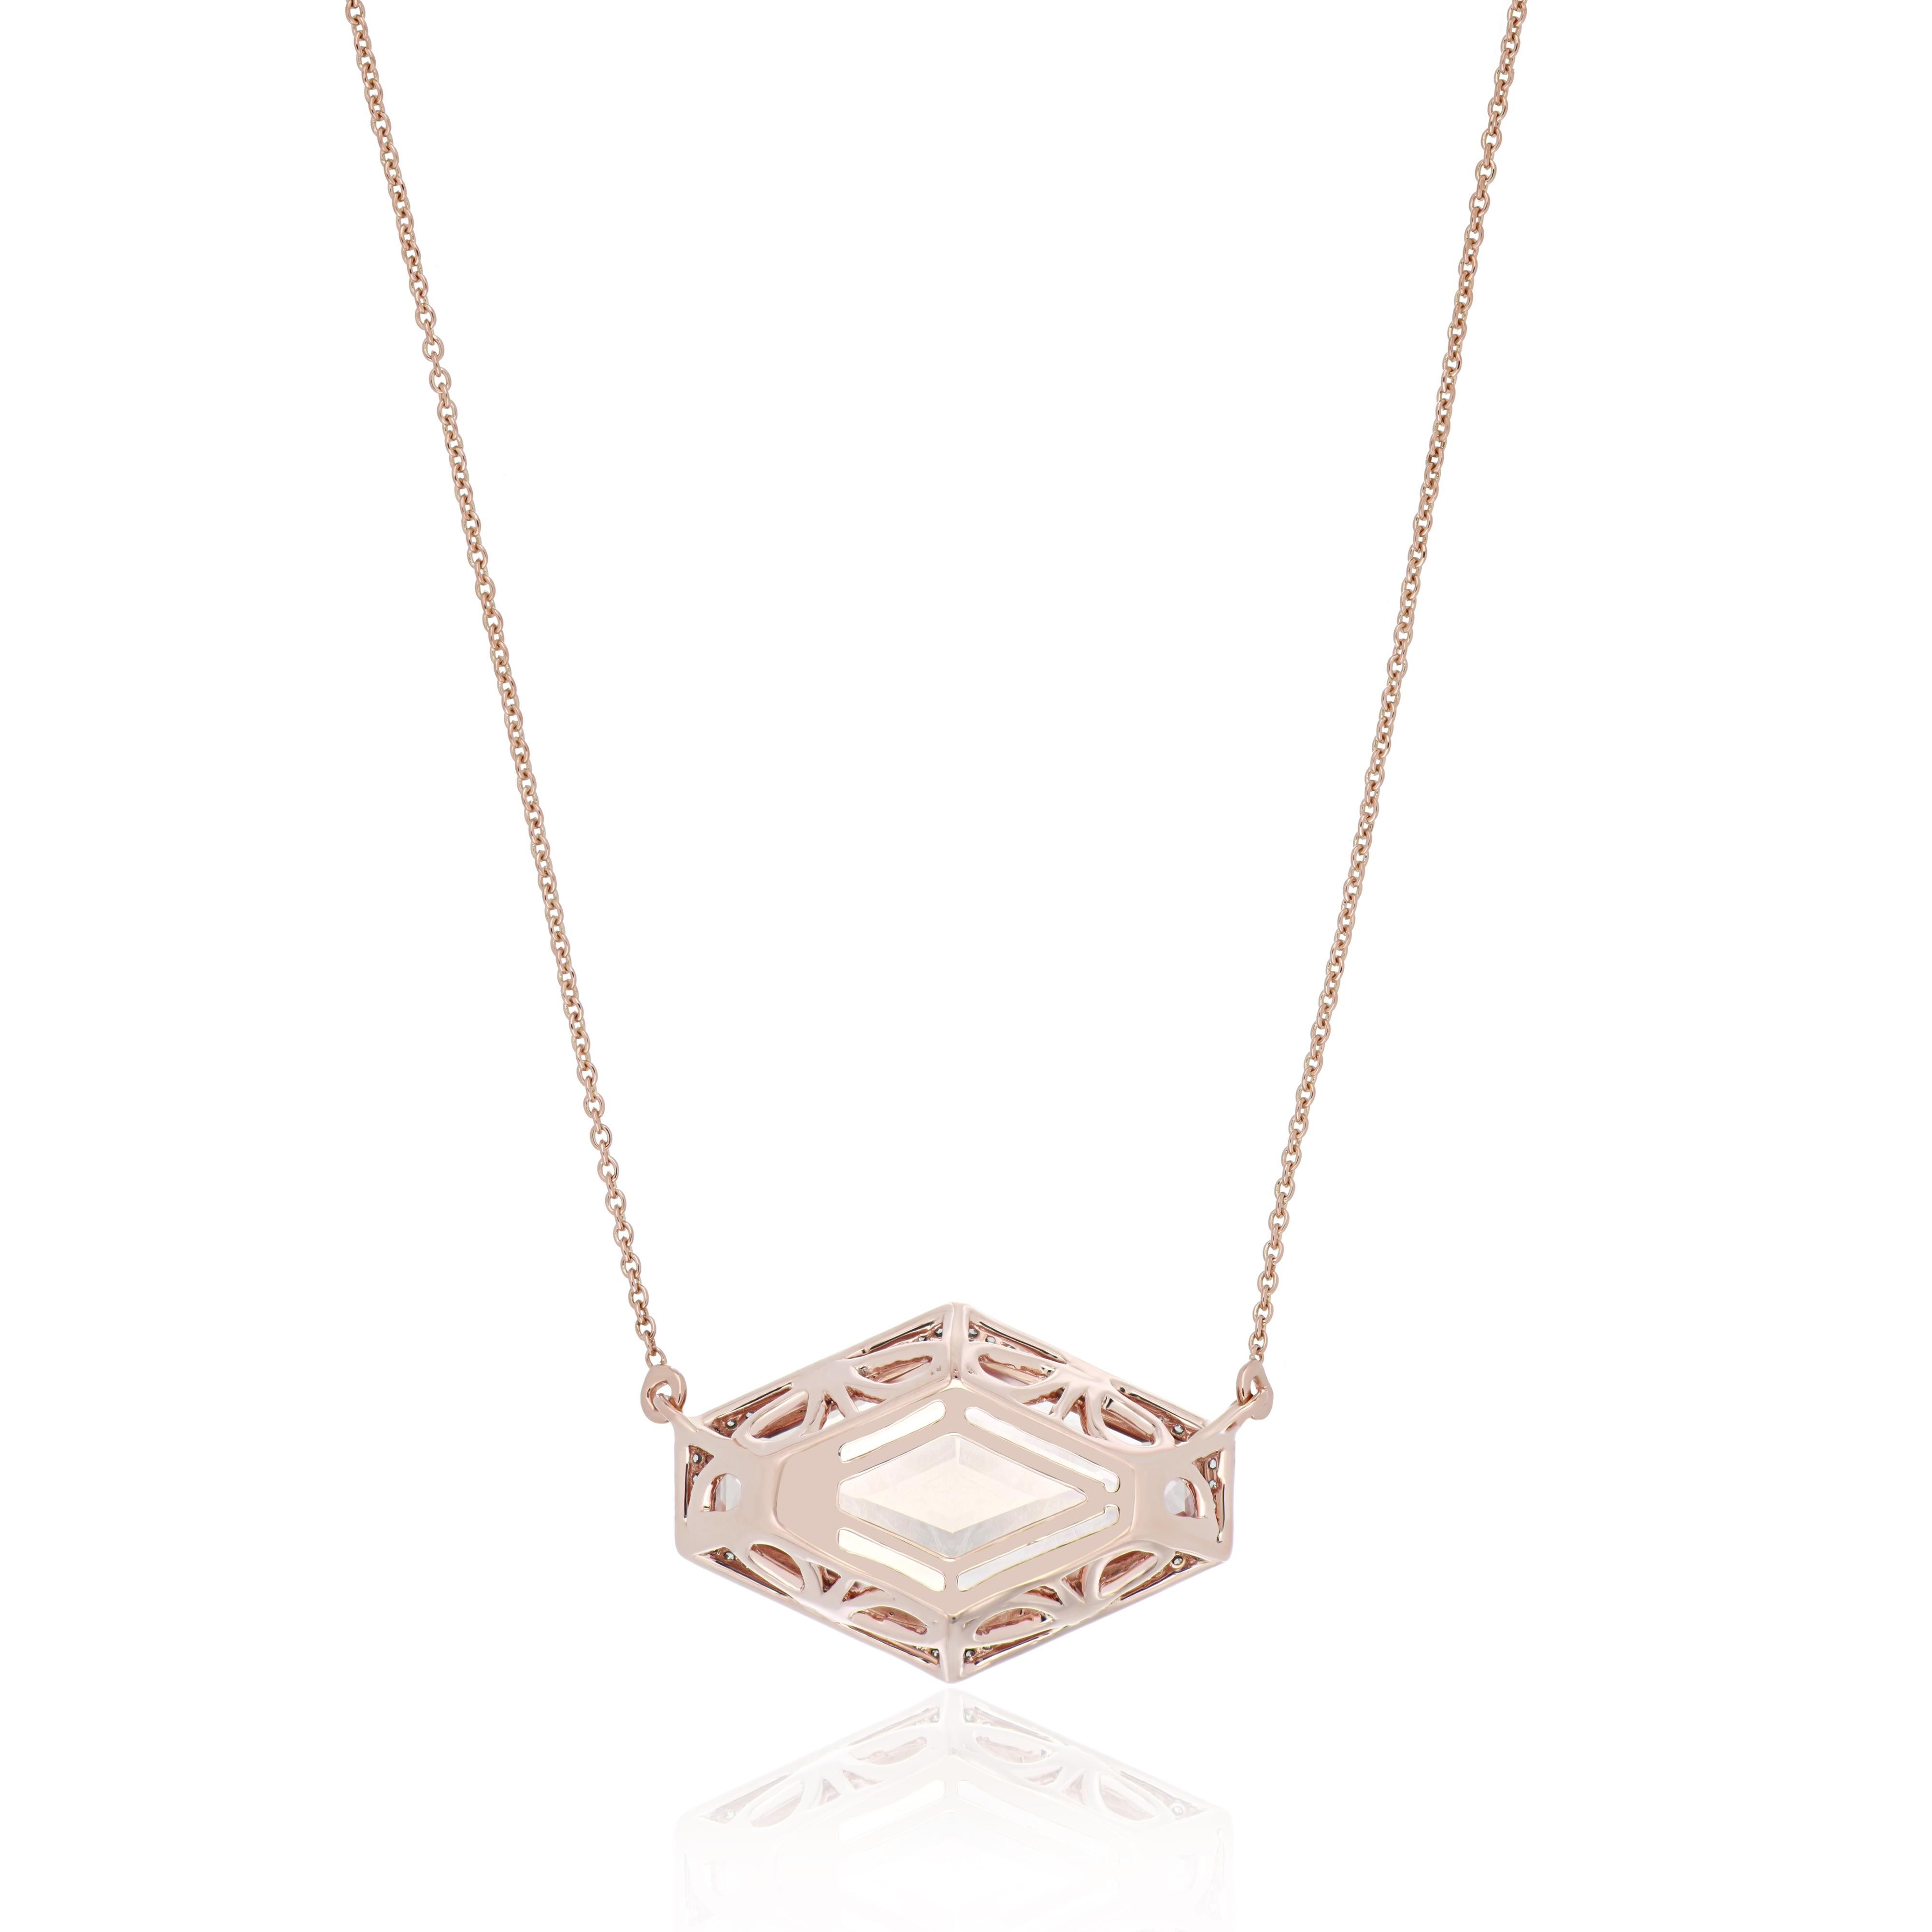 Elegant and exquisitely detailed Cocktail 14K pendant Necklace, center set with exclusively hand cut 13.84 Cts. (approx.) Fancy Hexagon Morganite. Surrounded with Diamonds, weighing approx. 0.17 ct. Beautifully Hand crafted in 14 Karat Rose